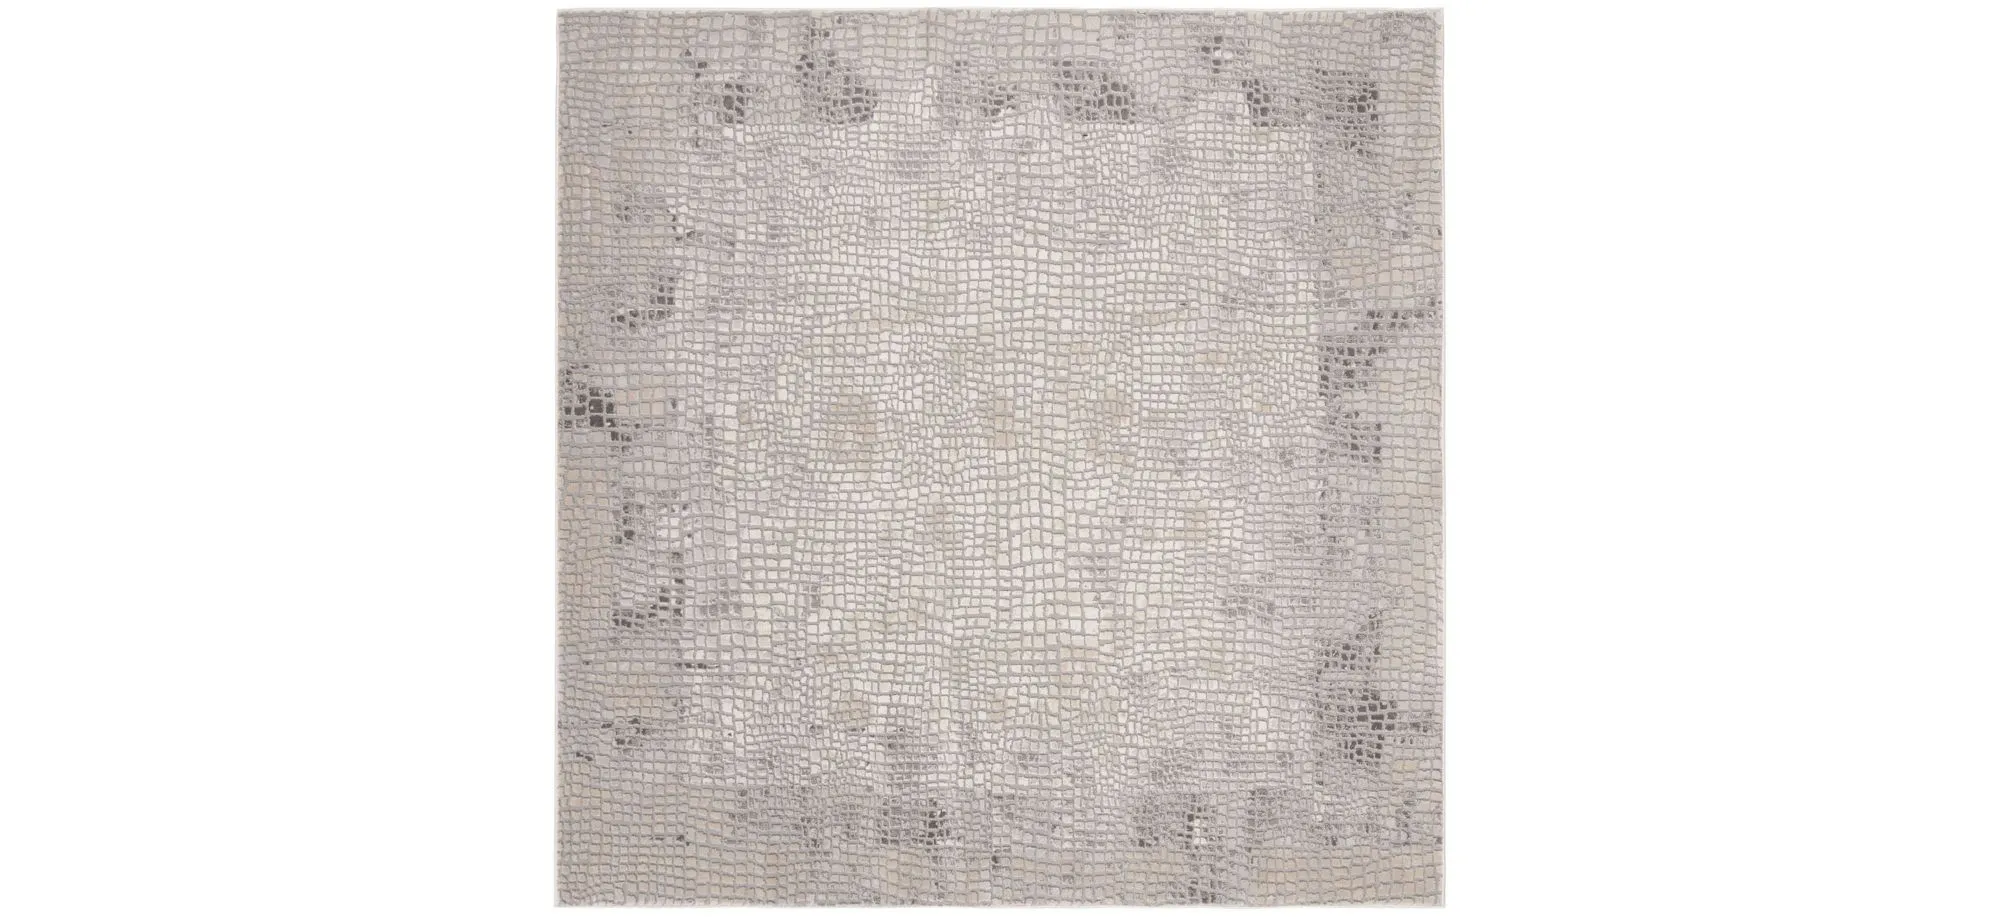 Nicki Square Area Rug in Taupe; Gray by Safavieh